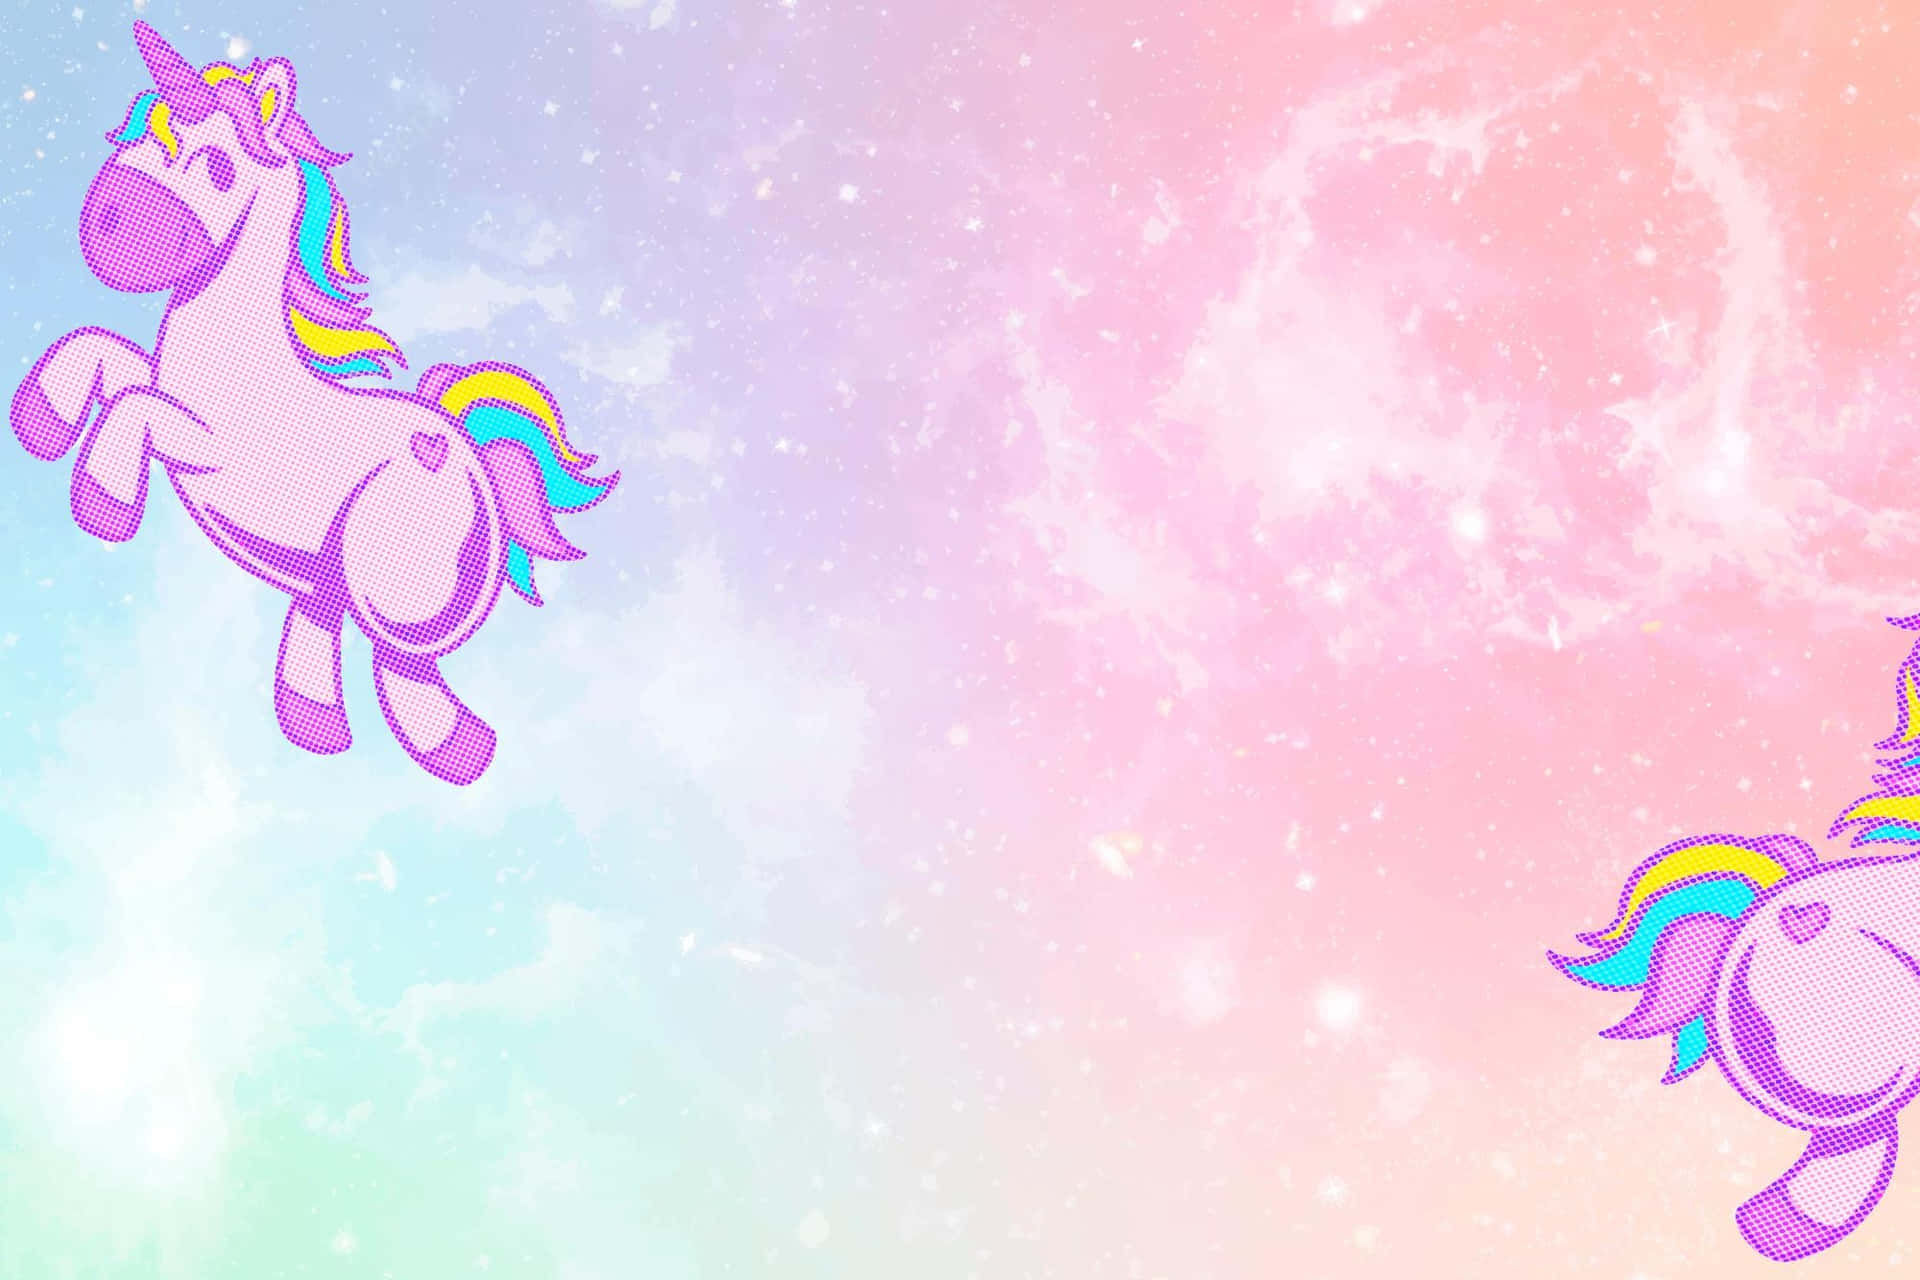 Magic and mystery abound in this beautiful pastel unicorn scene.